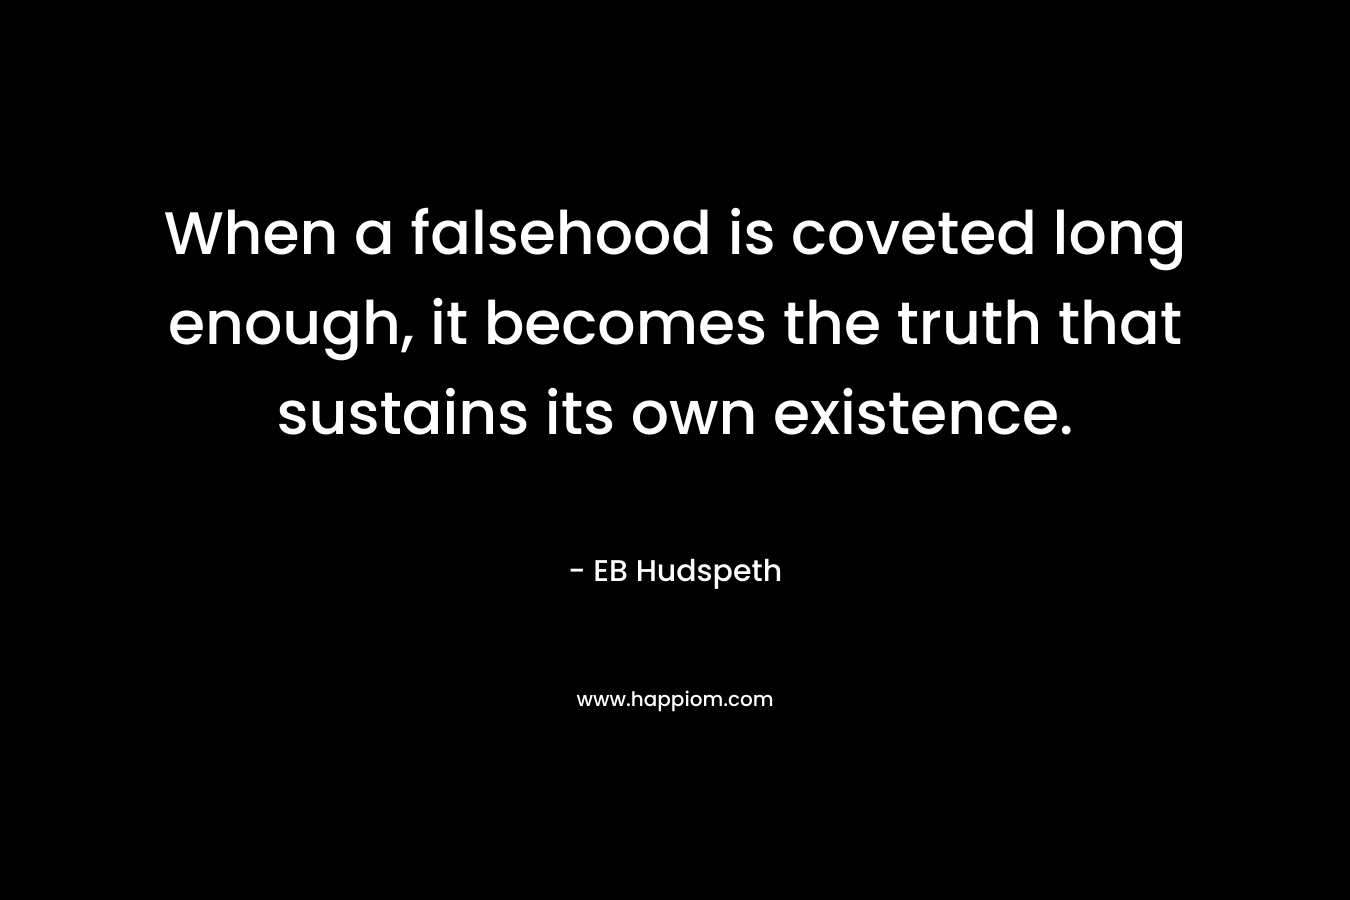 When a falsehood is coveted long enough, it becomes the truth that sustains its own existence. – EB Hudspeth